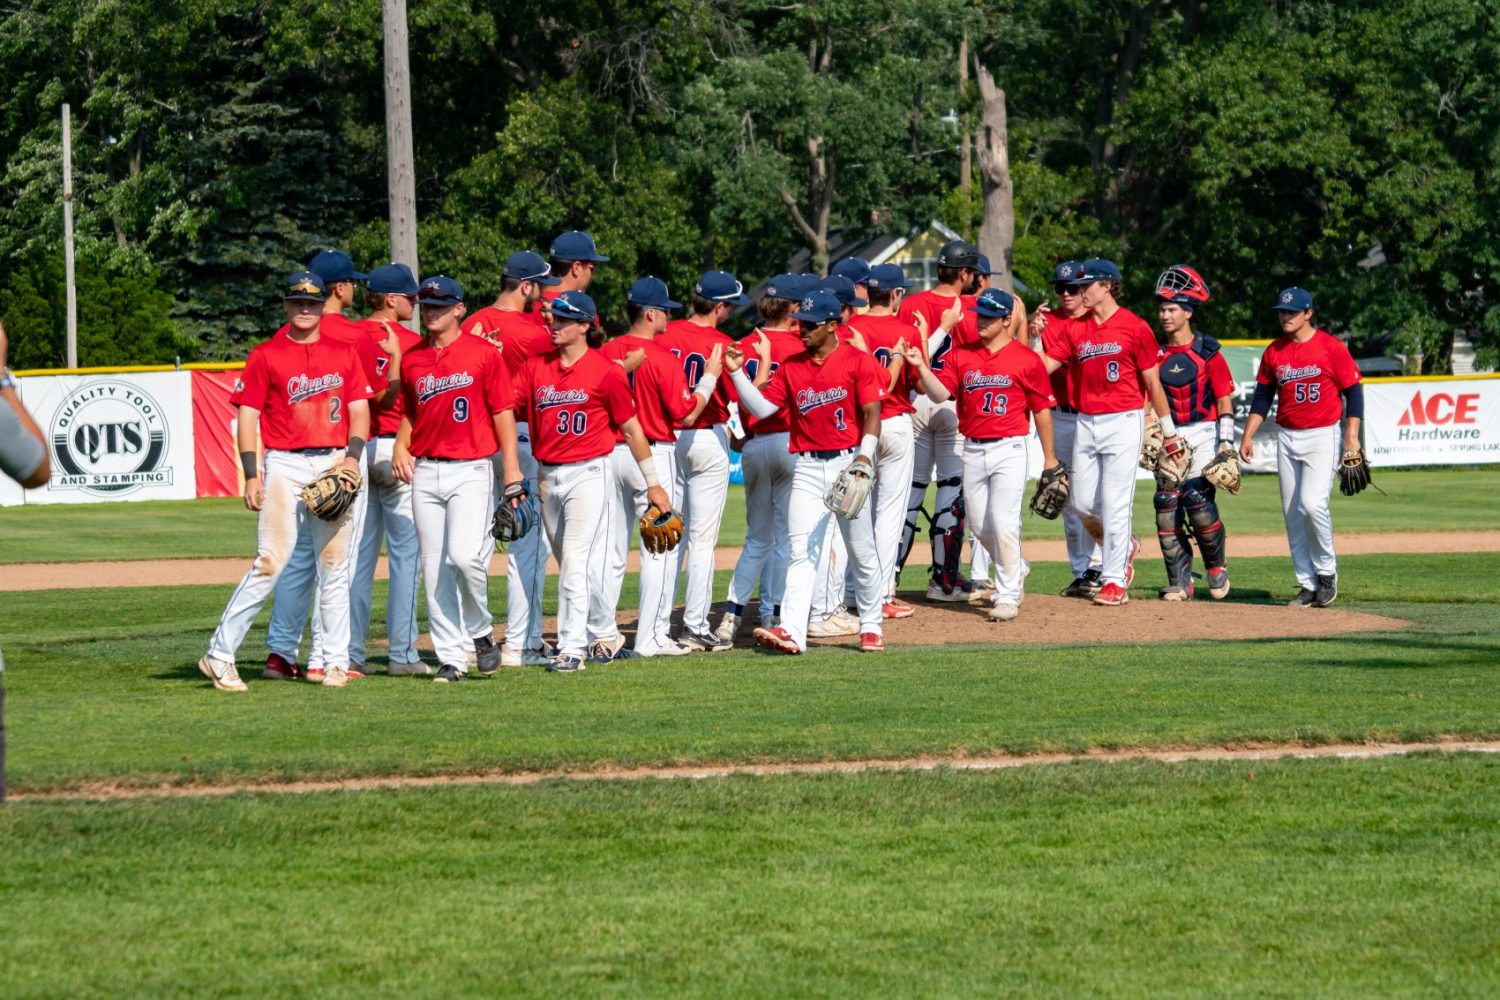 Muskegon Clippers make history in doubleheader sweep over Lima Locos